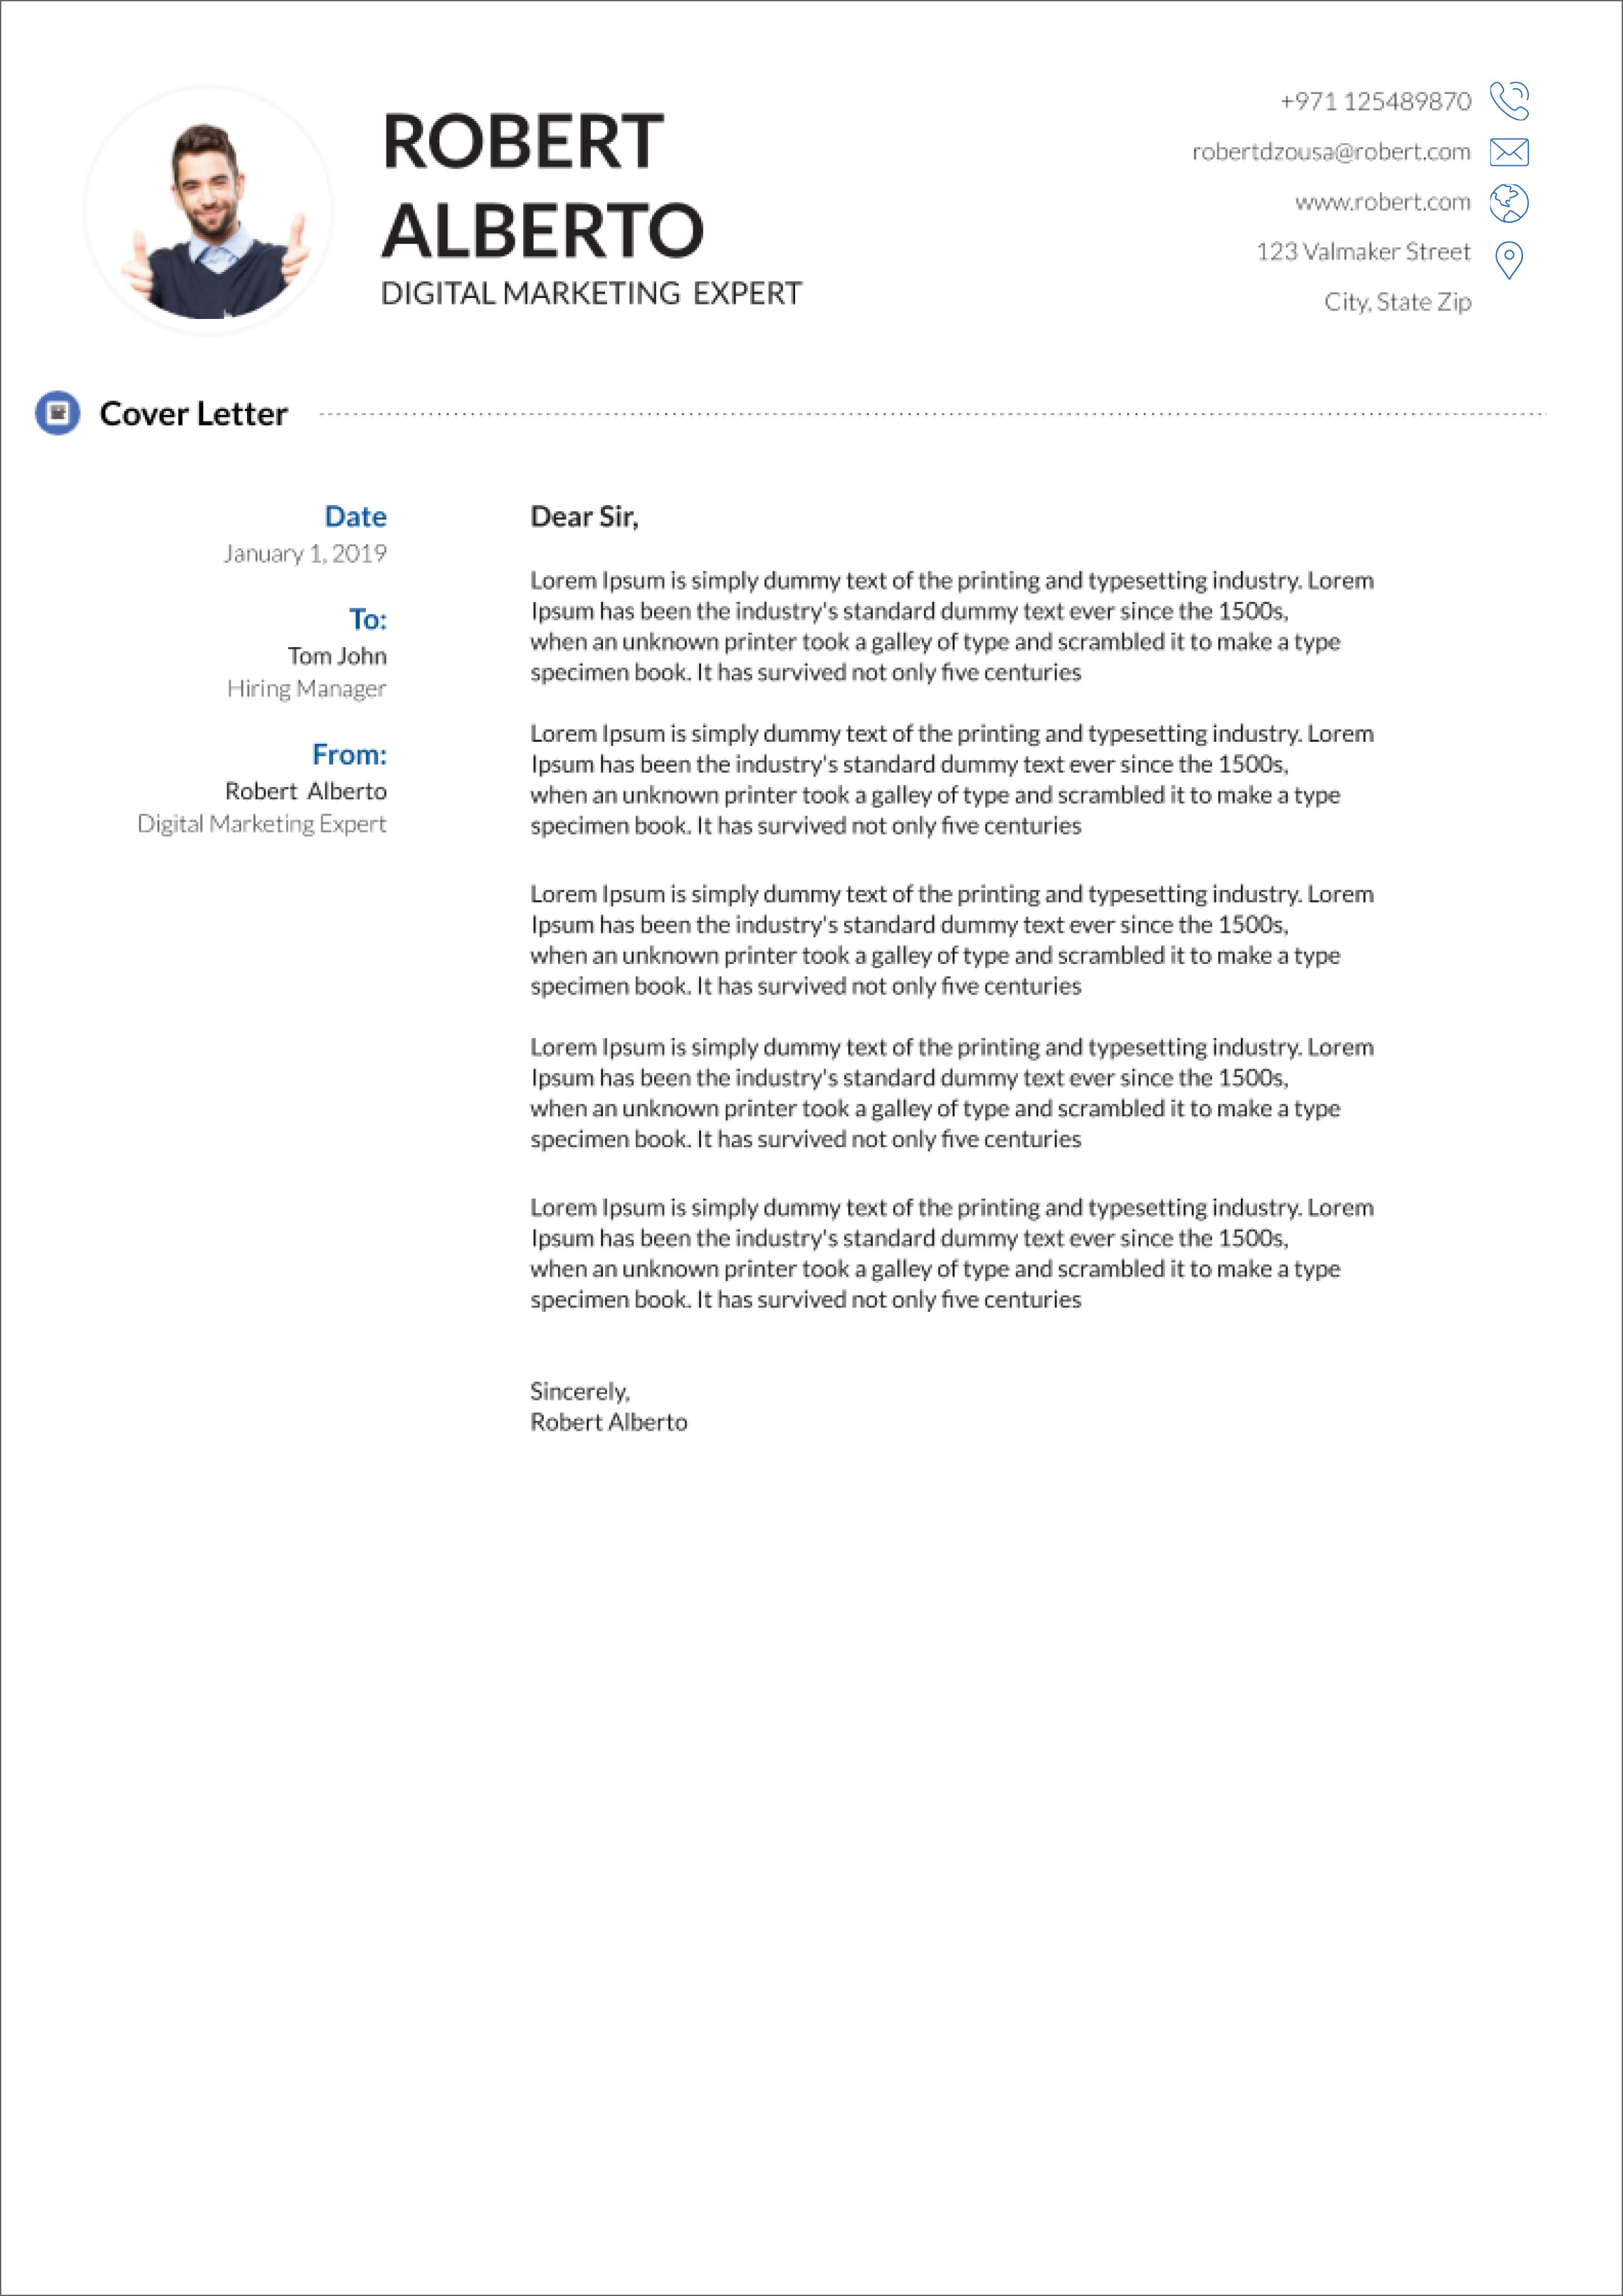 cover letter microsoft word template download